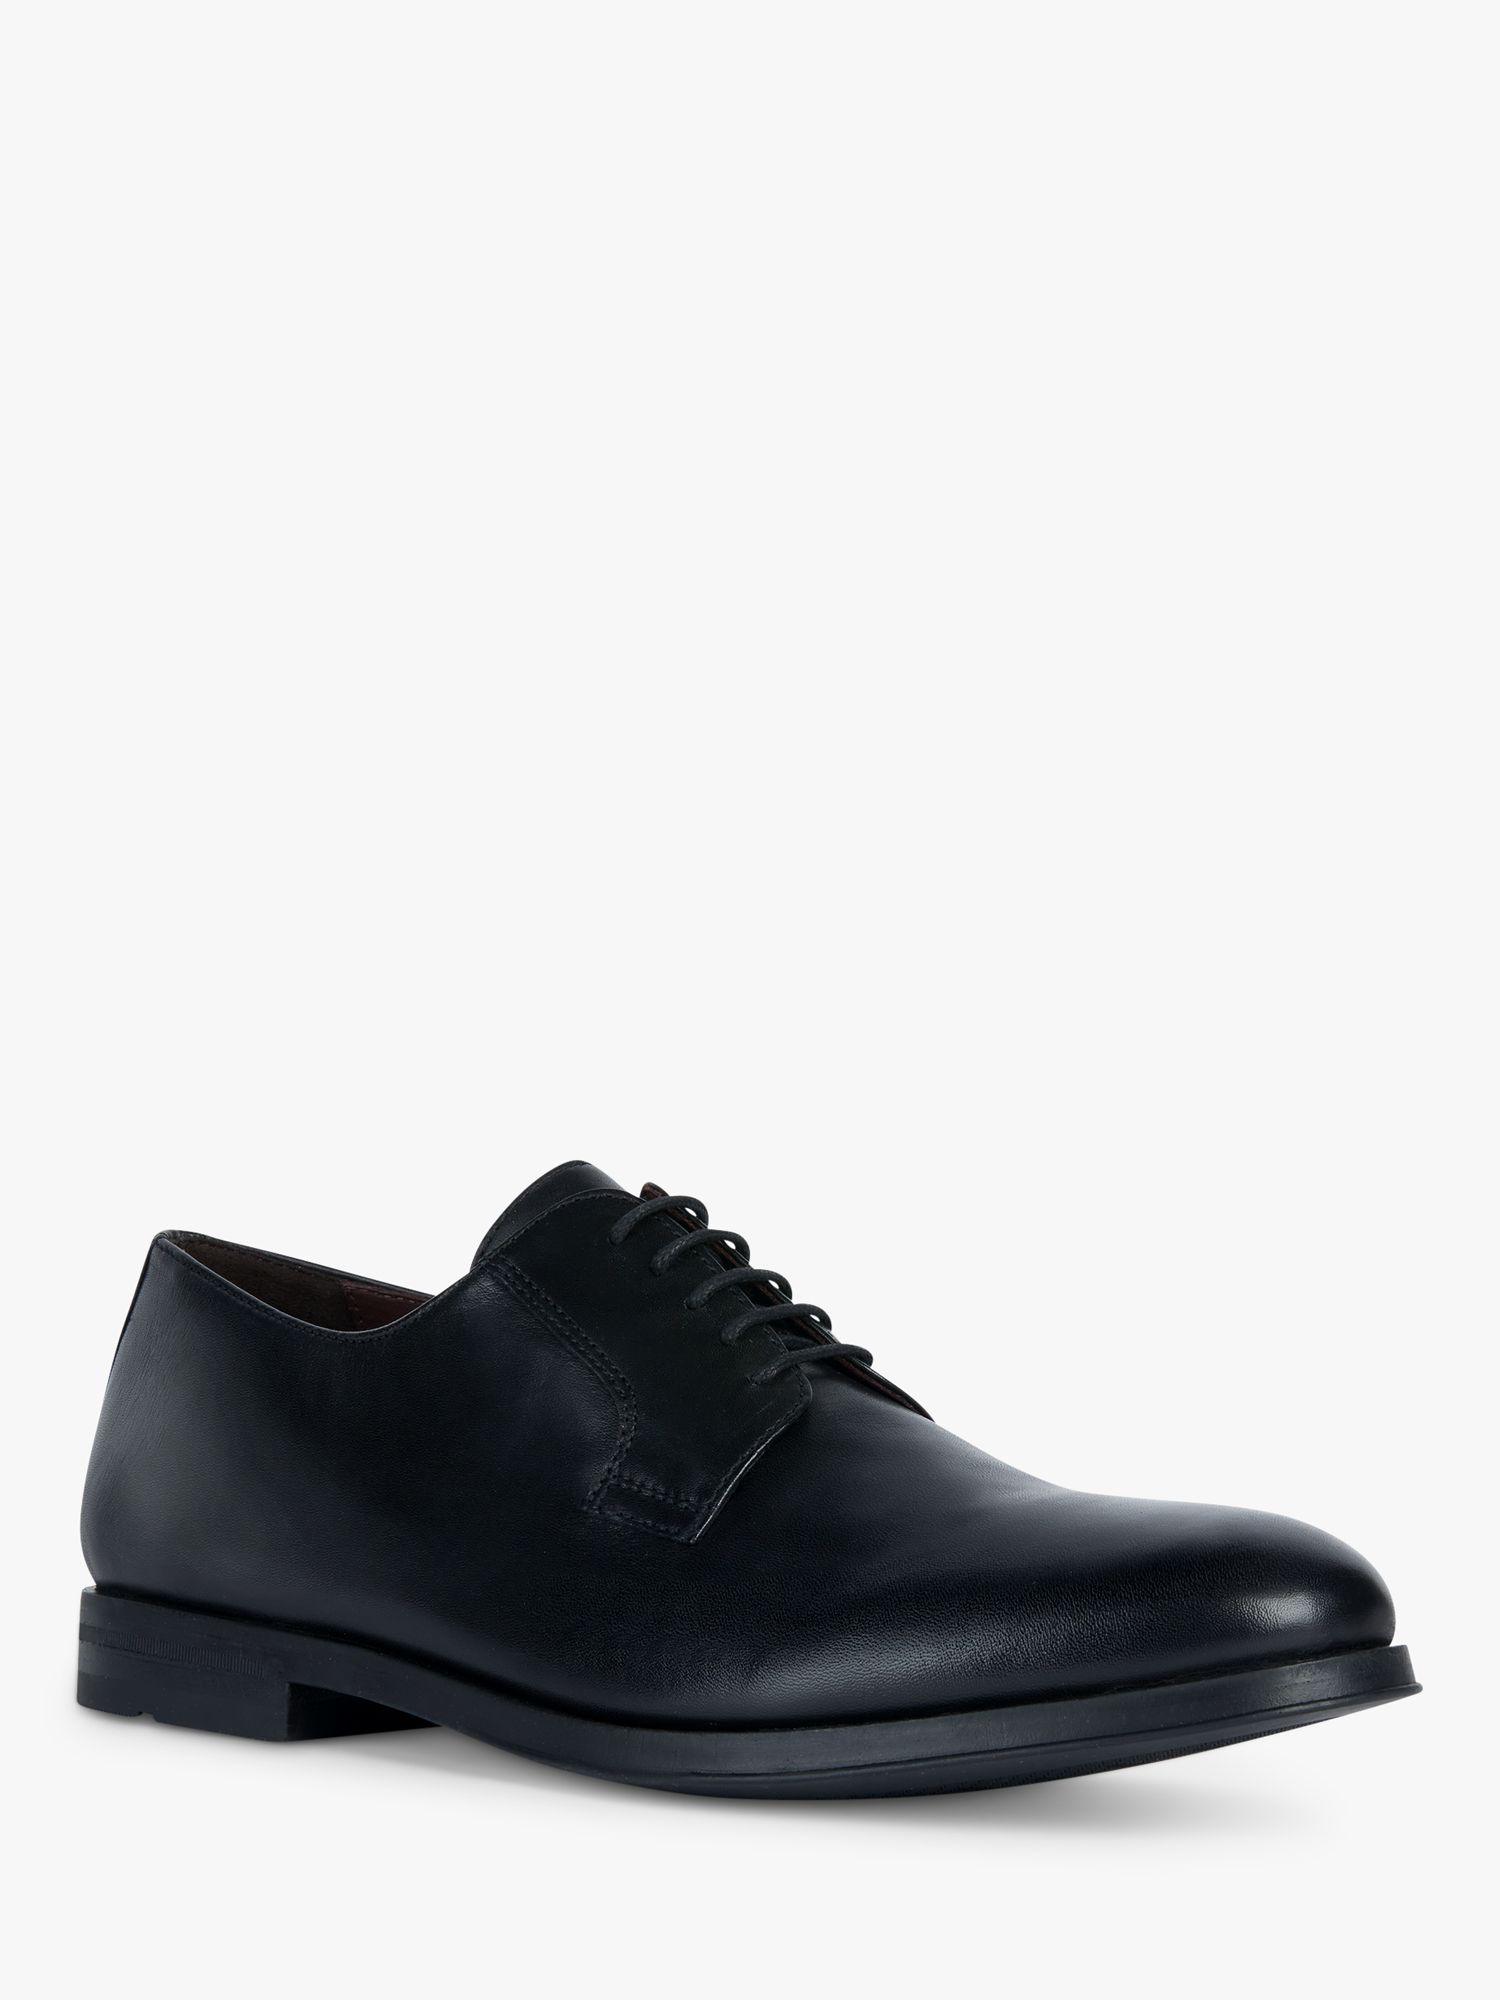 Geox Decio Wide Fit Leather Oxford Shoes, Black at John Lewis & Partners